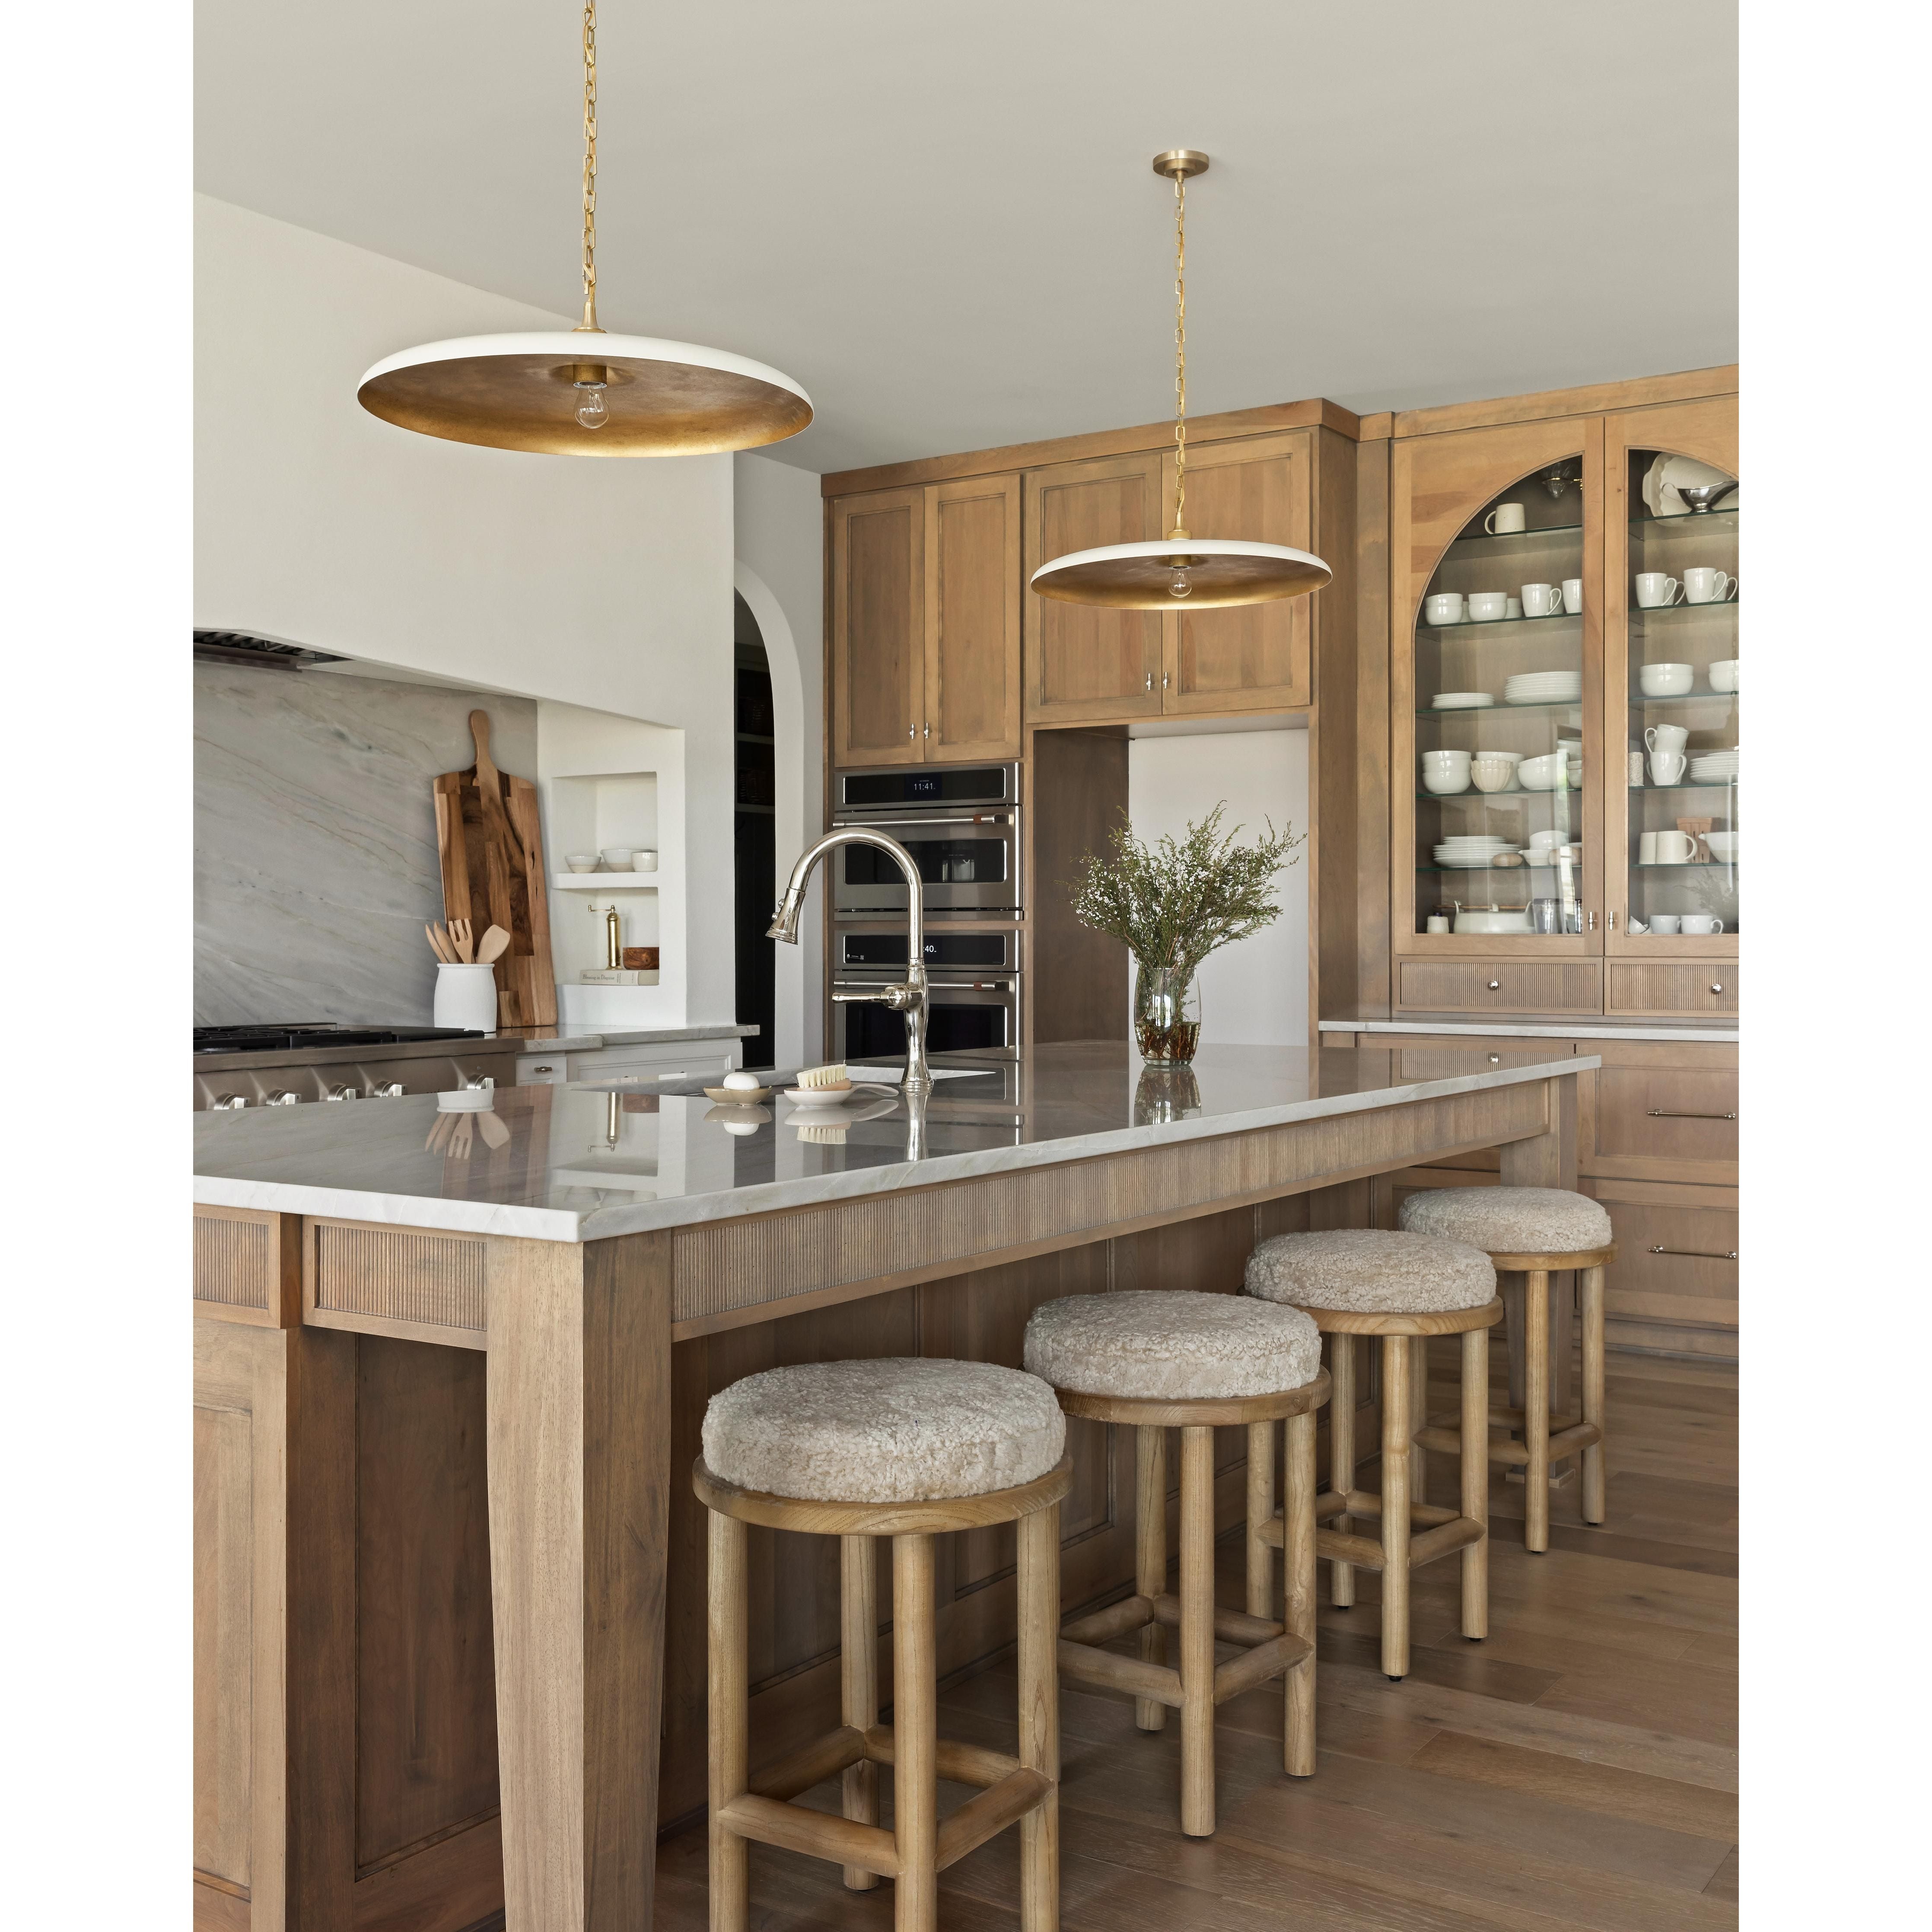 Introducing the Saldino Stool, the perfect addition to any modern coastal kitchen. With its blonde-finished solid parawood frame and soft beige shearling seat, this stool offers both comfort and style. Featuring reeded cabinet details, quarter sawn white oak cabinets, and an arched kitchen hutch, it seamlessly blends with any kitchen design.